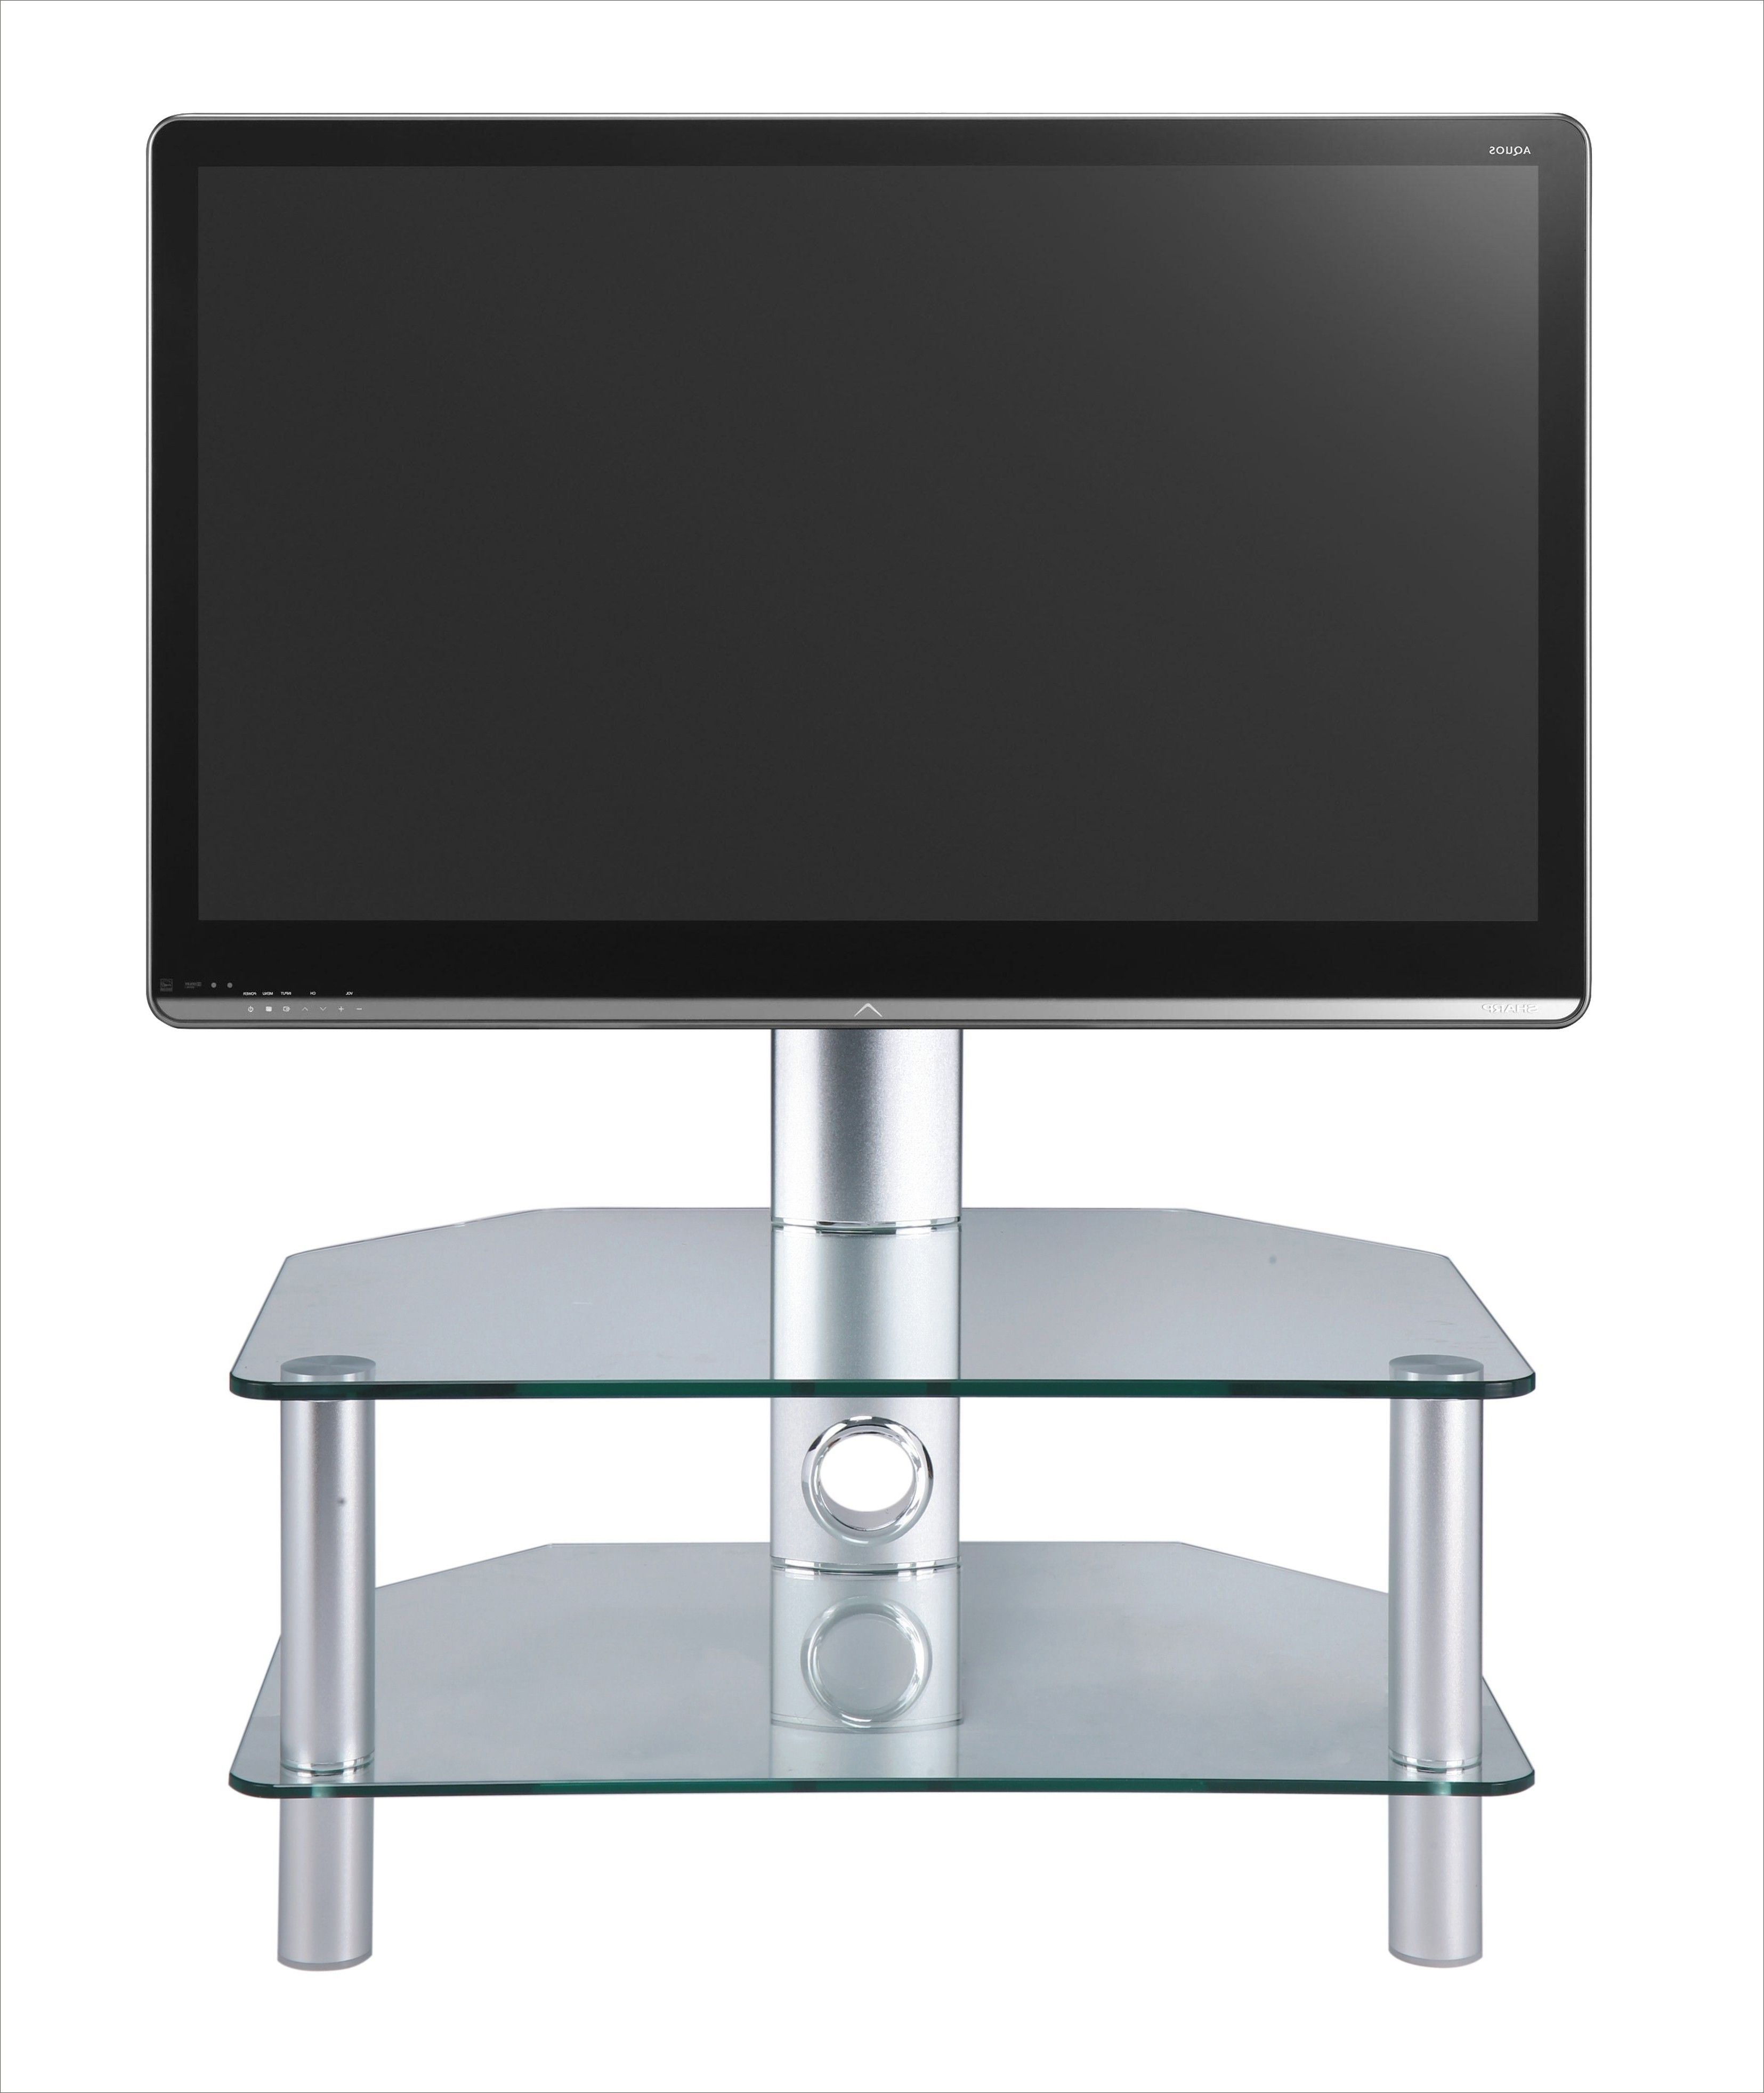 2018 Stil Tv Stands Throughout Swivel Clear Glass Cantilever Tv Stand Up To 37"stil Stand (View 5 of 20)